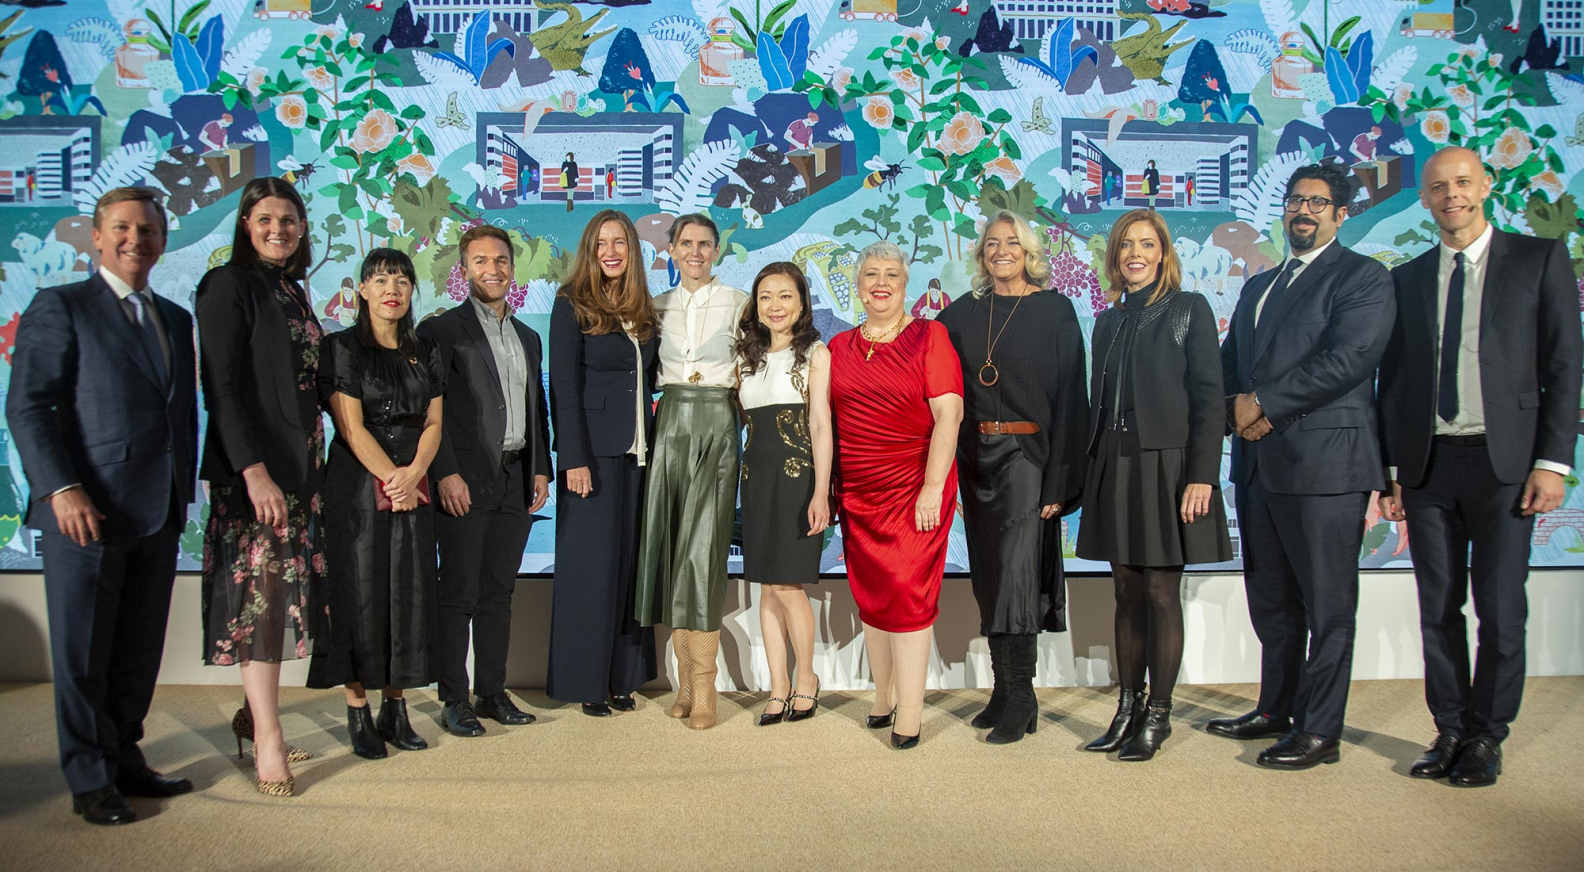 Future LIFE New York: LVMH reaffirms sustainability commitments